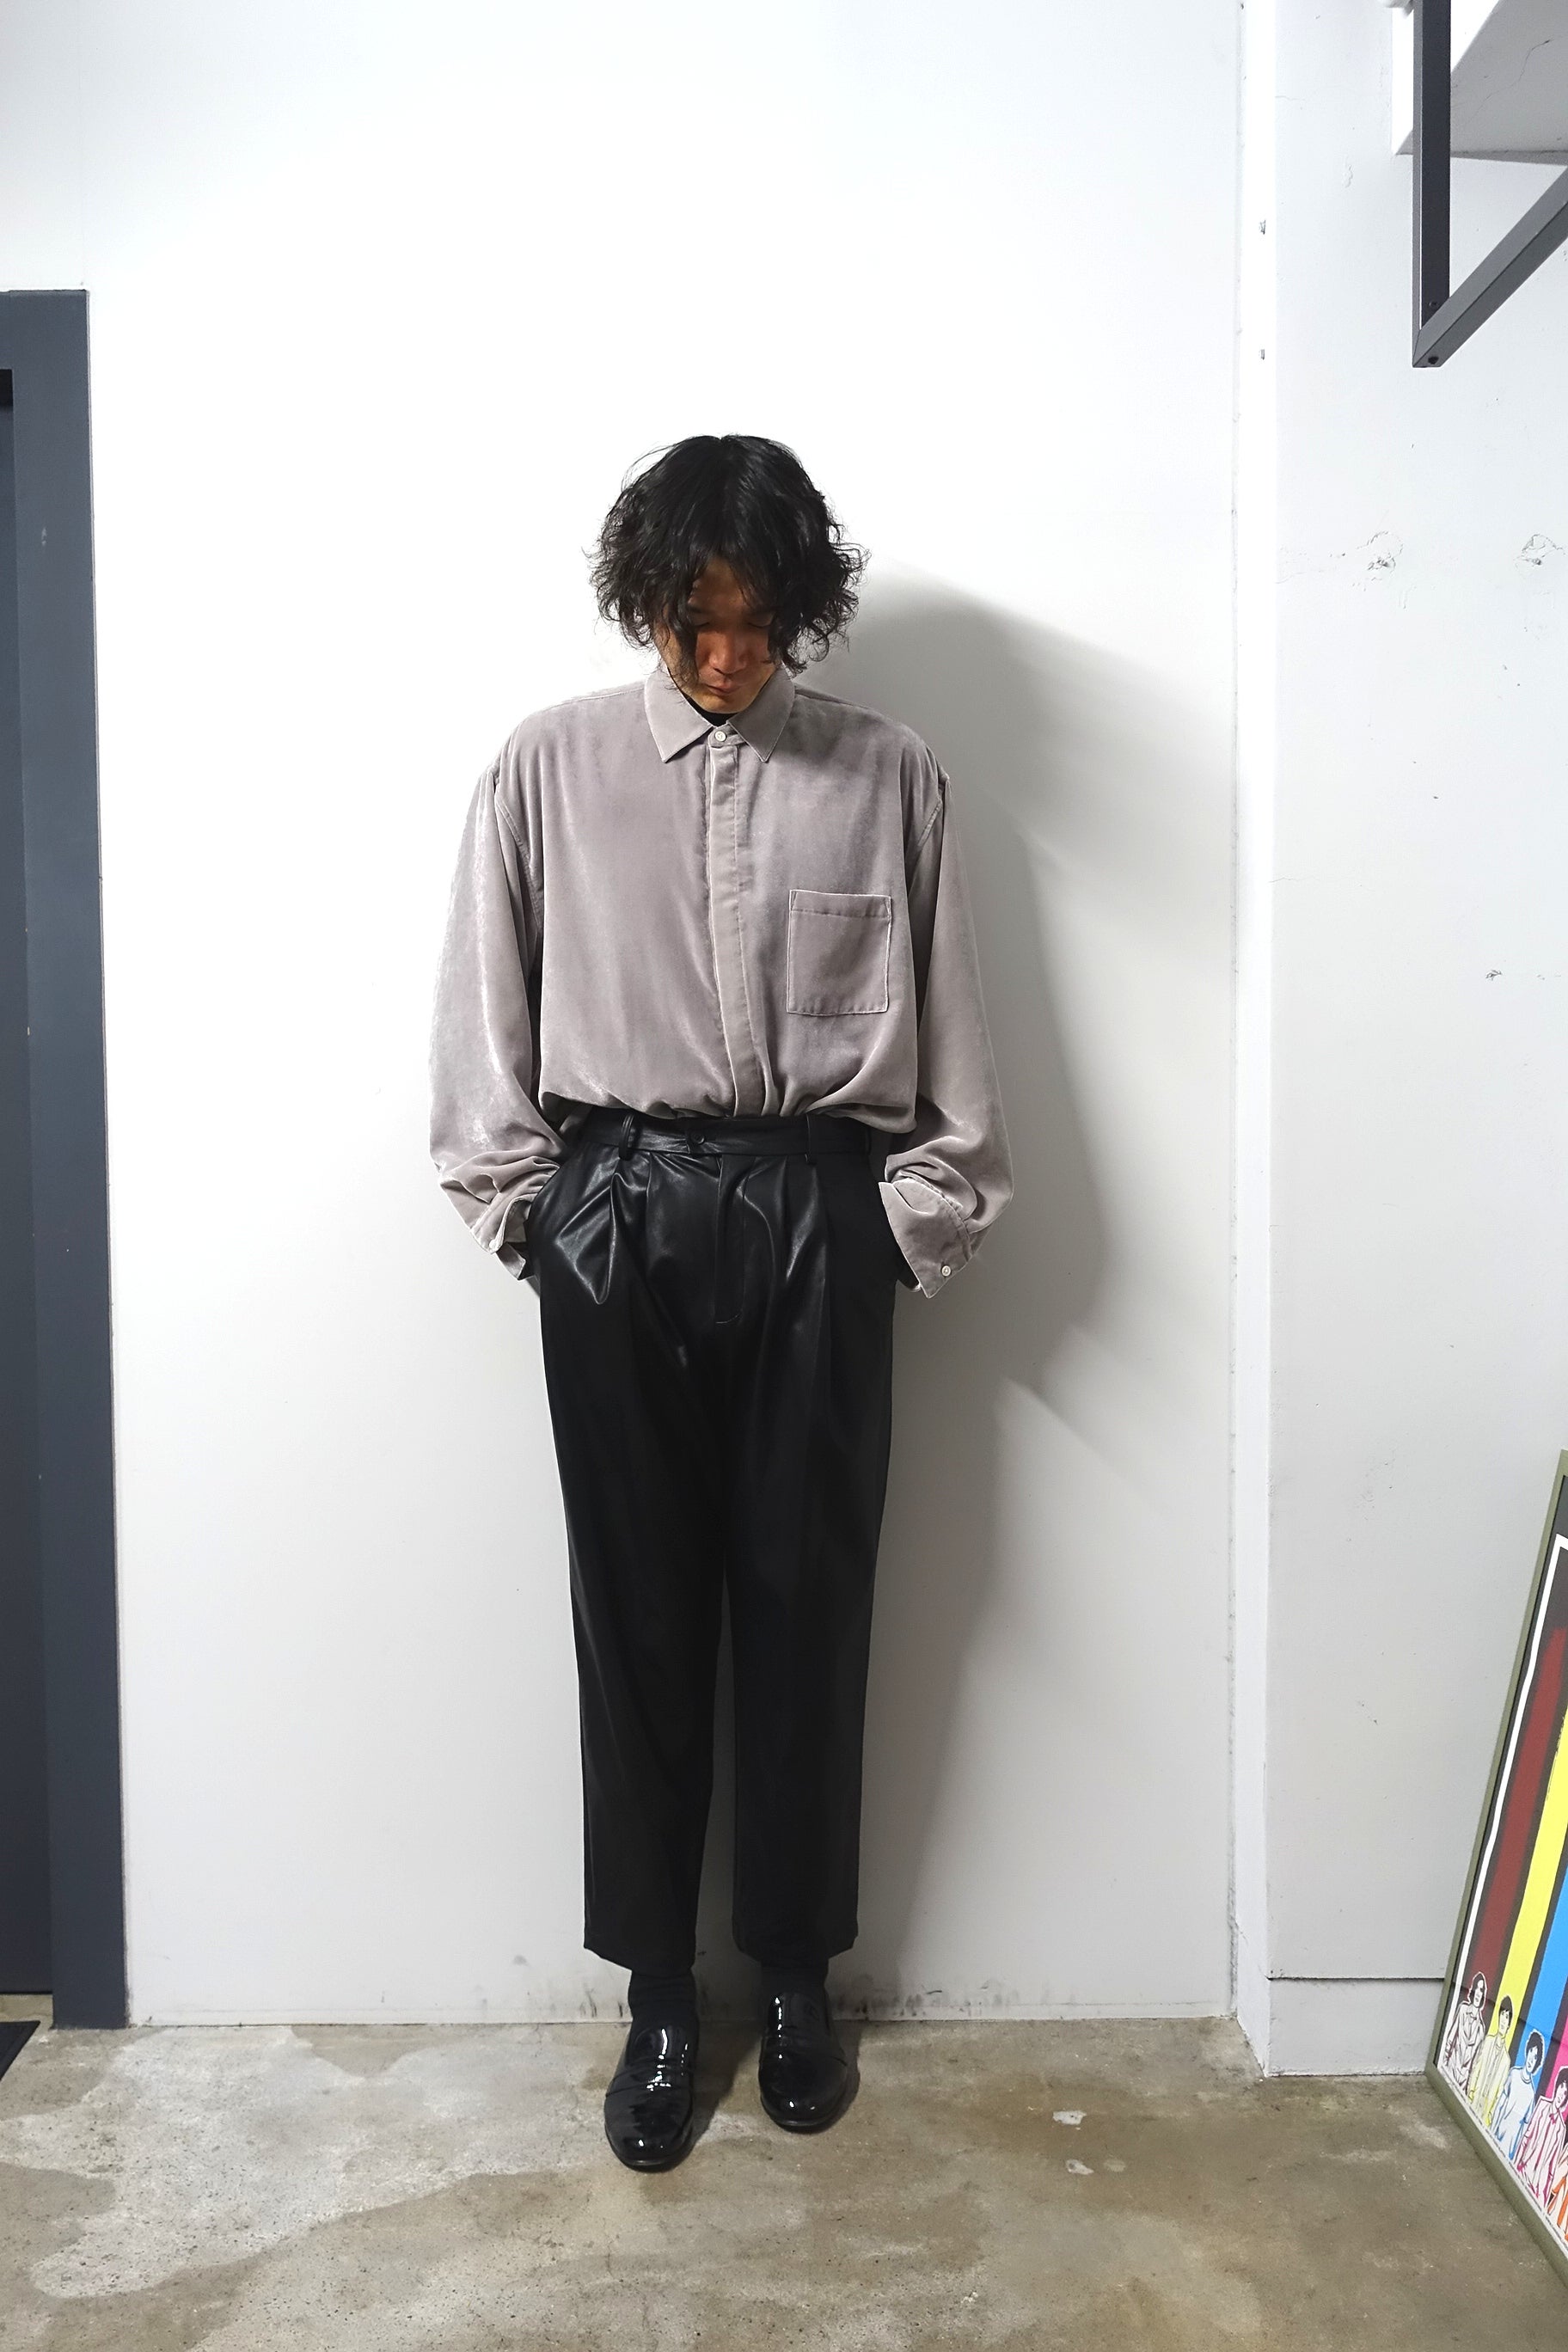 stein(シュタイン)/FAKE LEATHER TROUSERS/Black 通販 取り扱い-CONCRETE RIVER